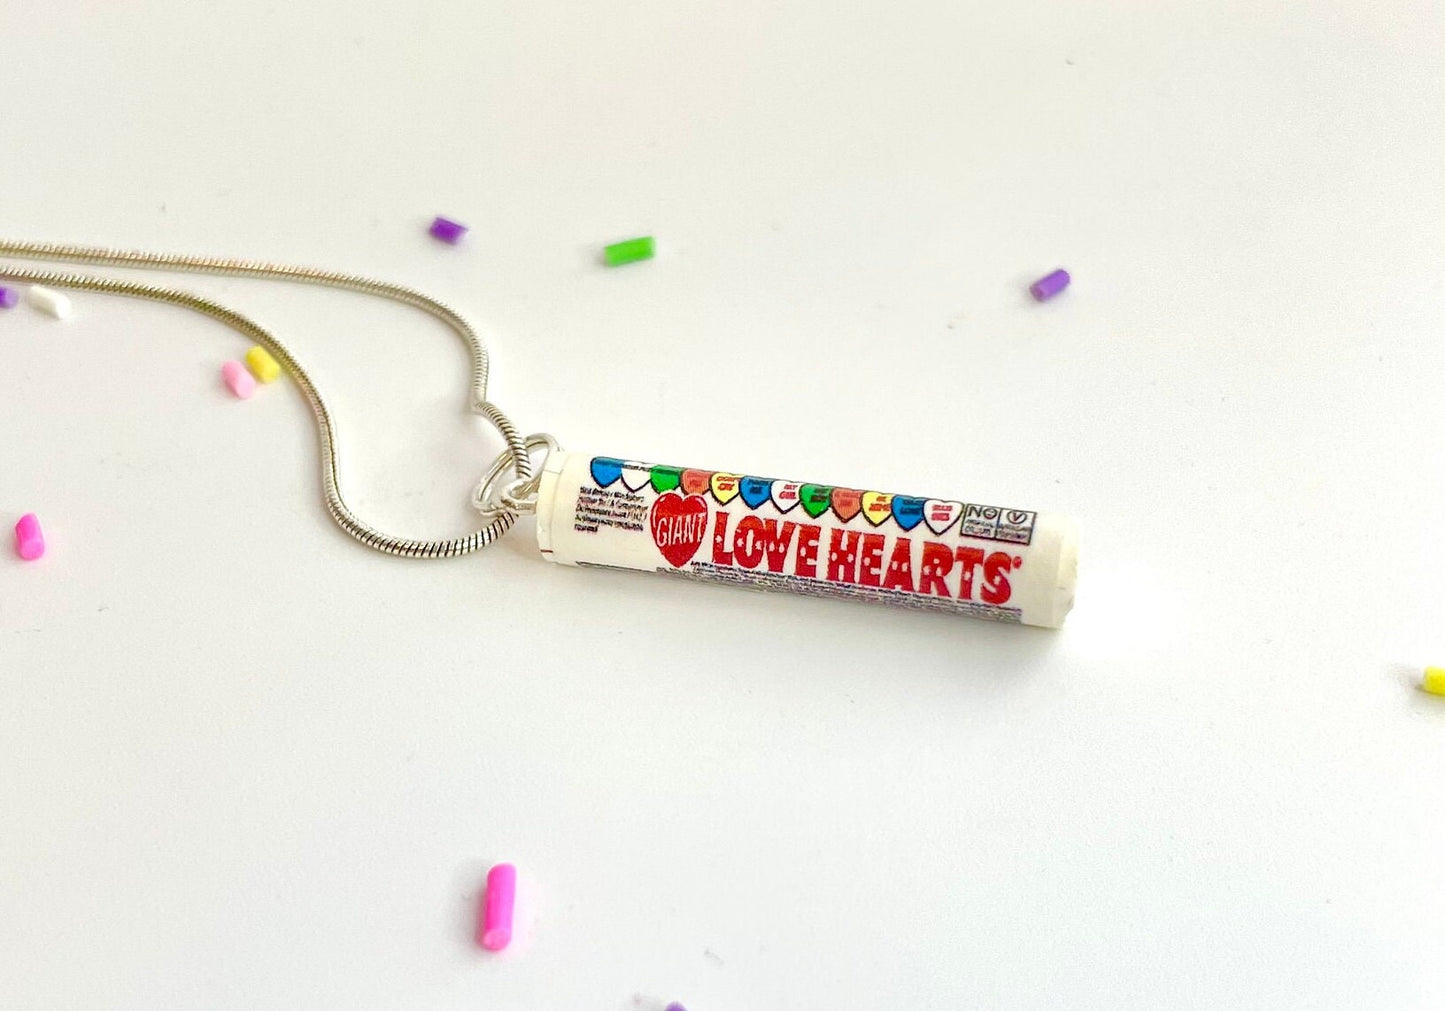 Handmade LoveHearts Candy Sweets Necklace